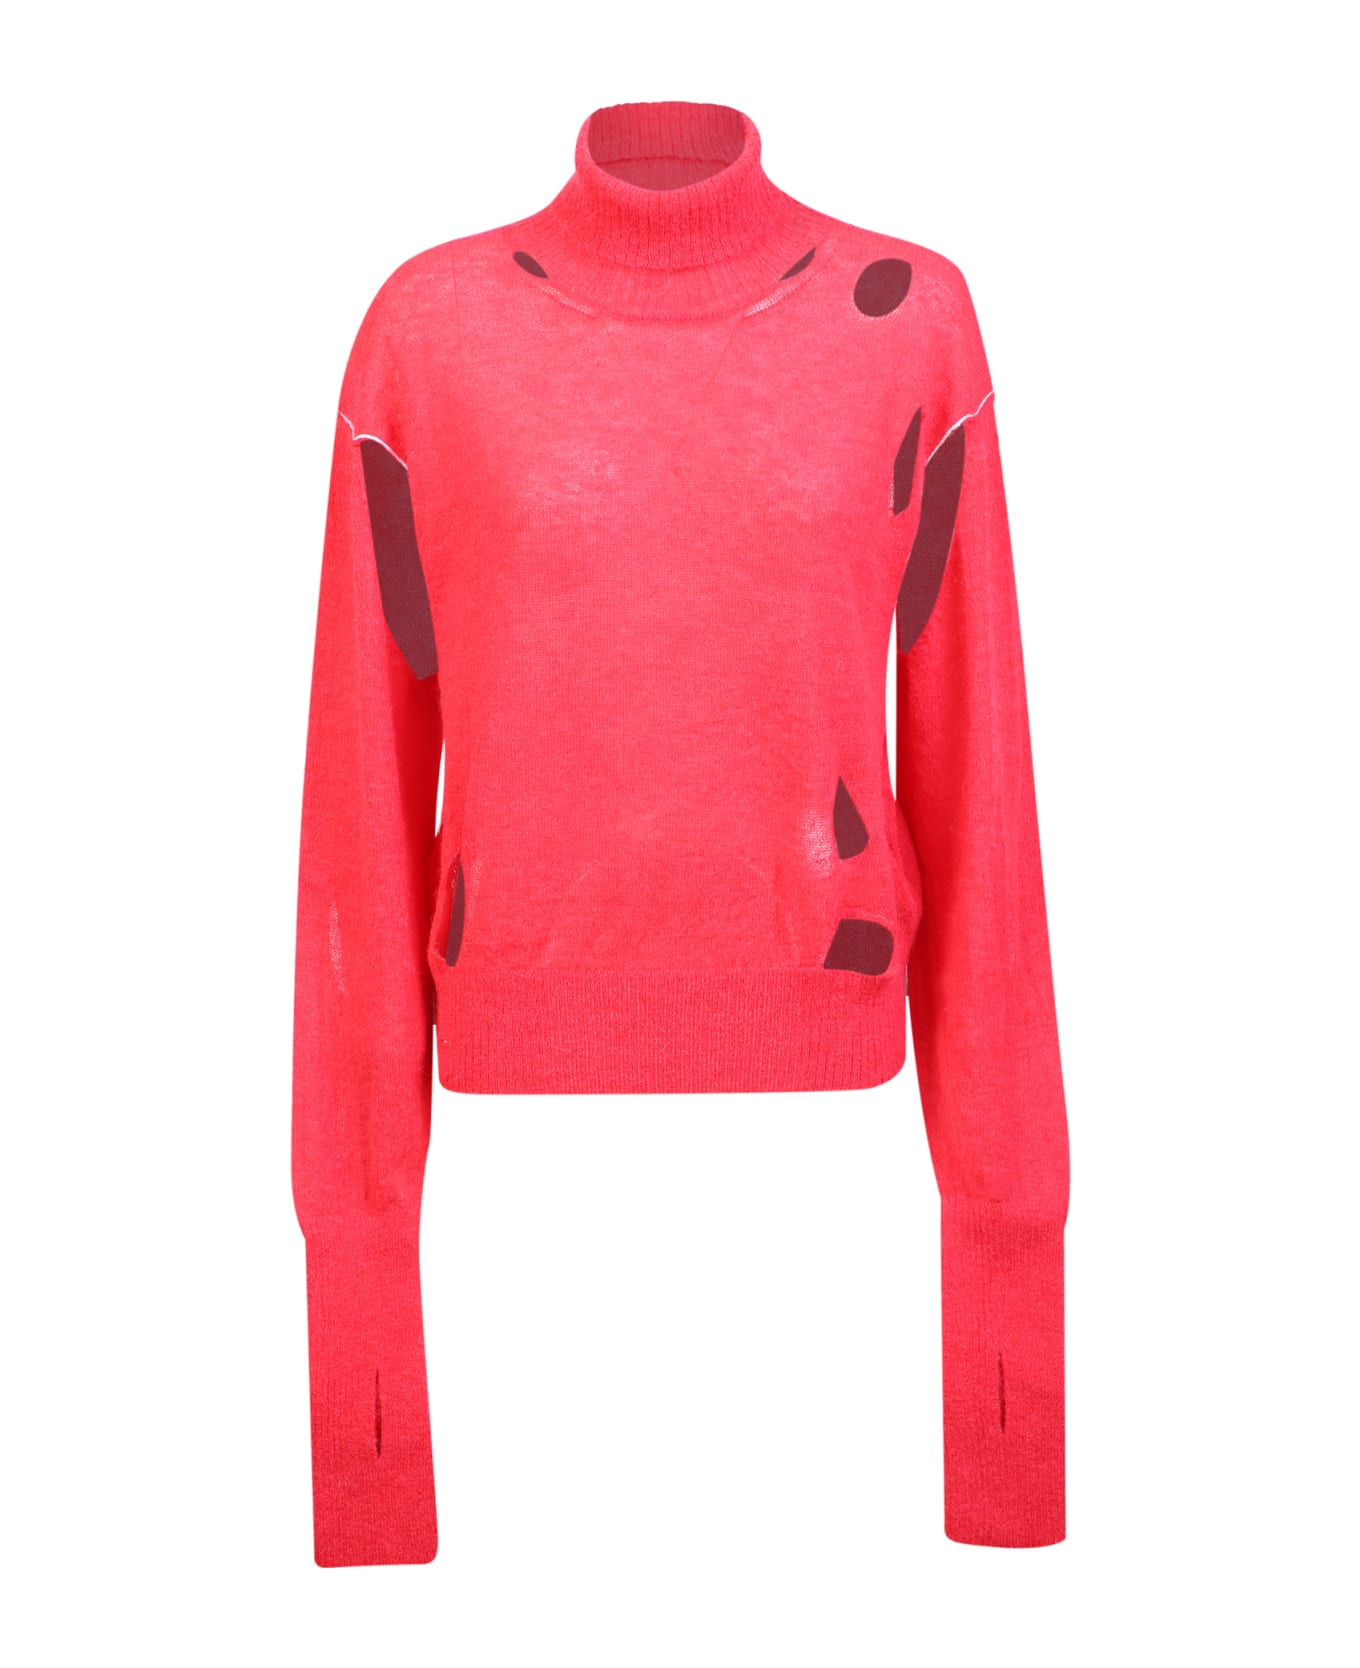 MM6 Maison Margiela High Neck Pullover With Worn Effect Red - Red